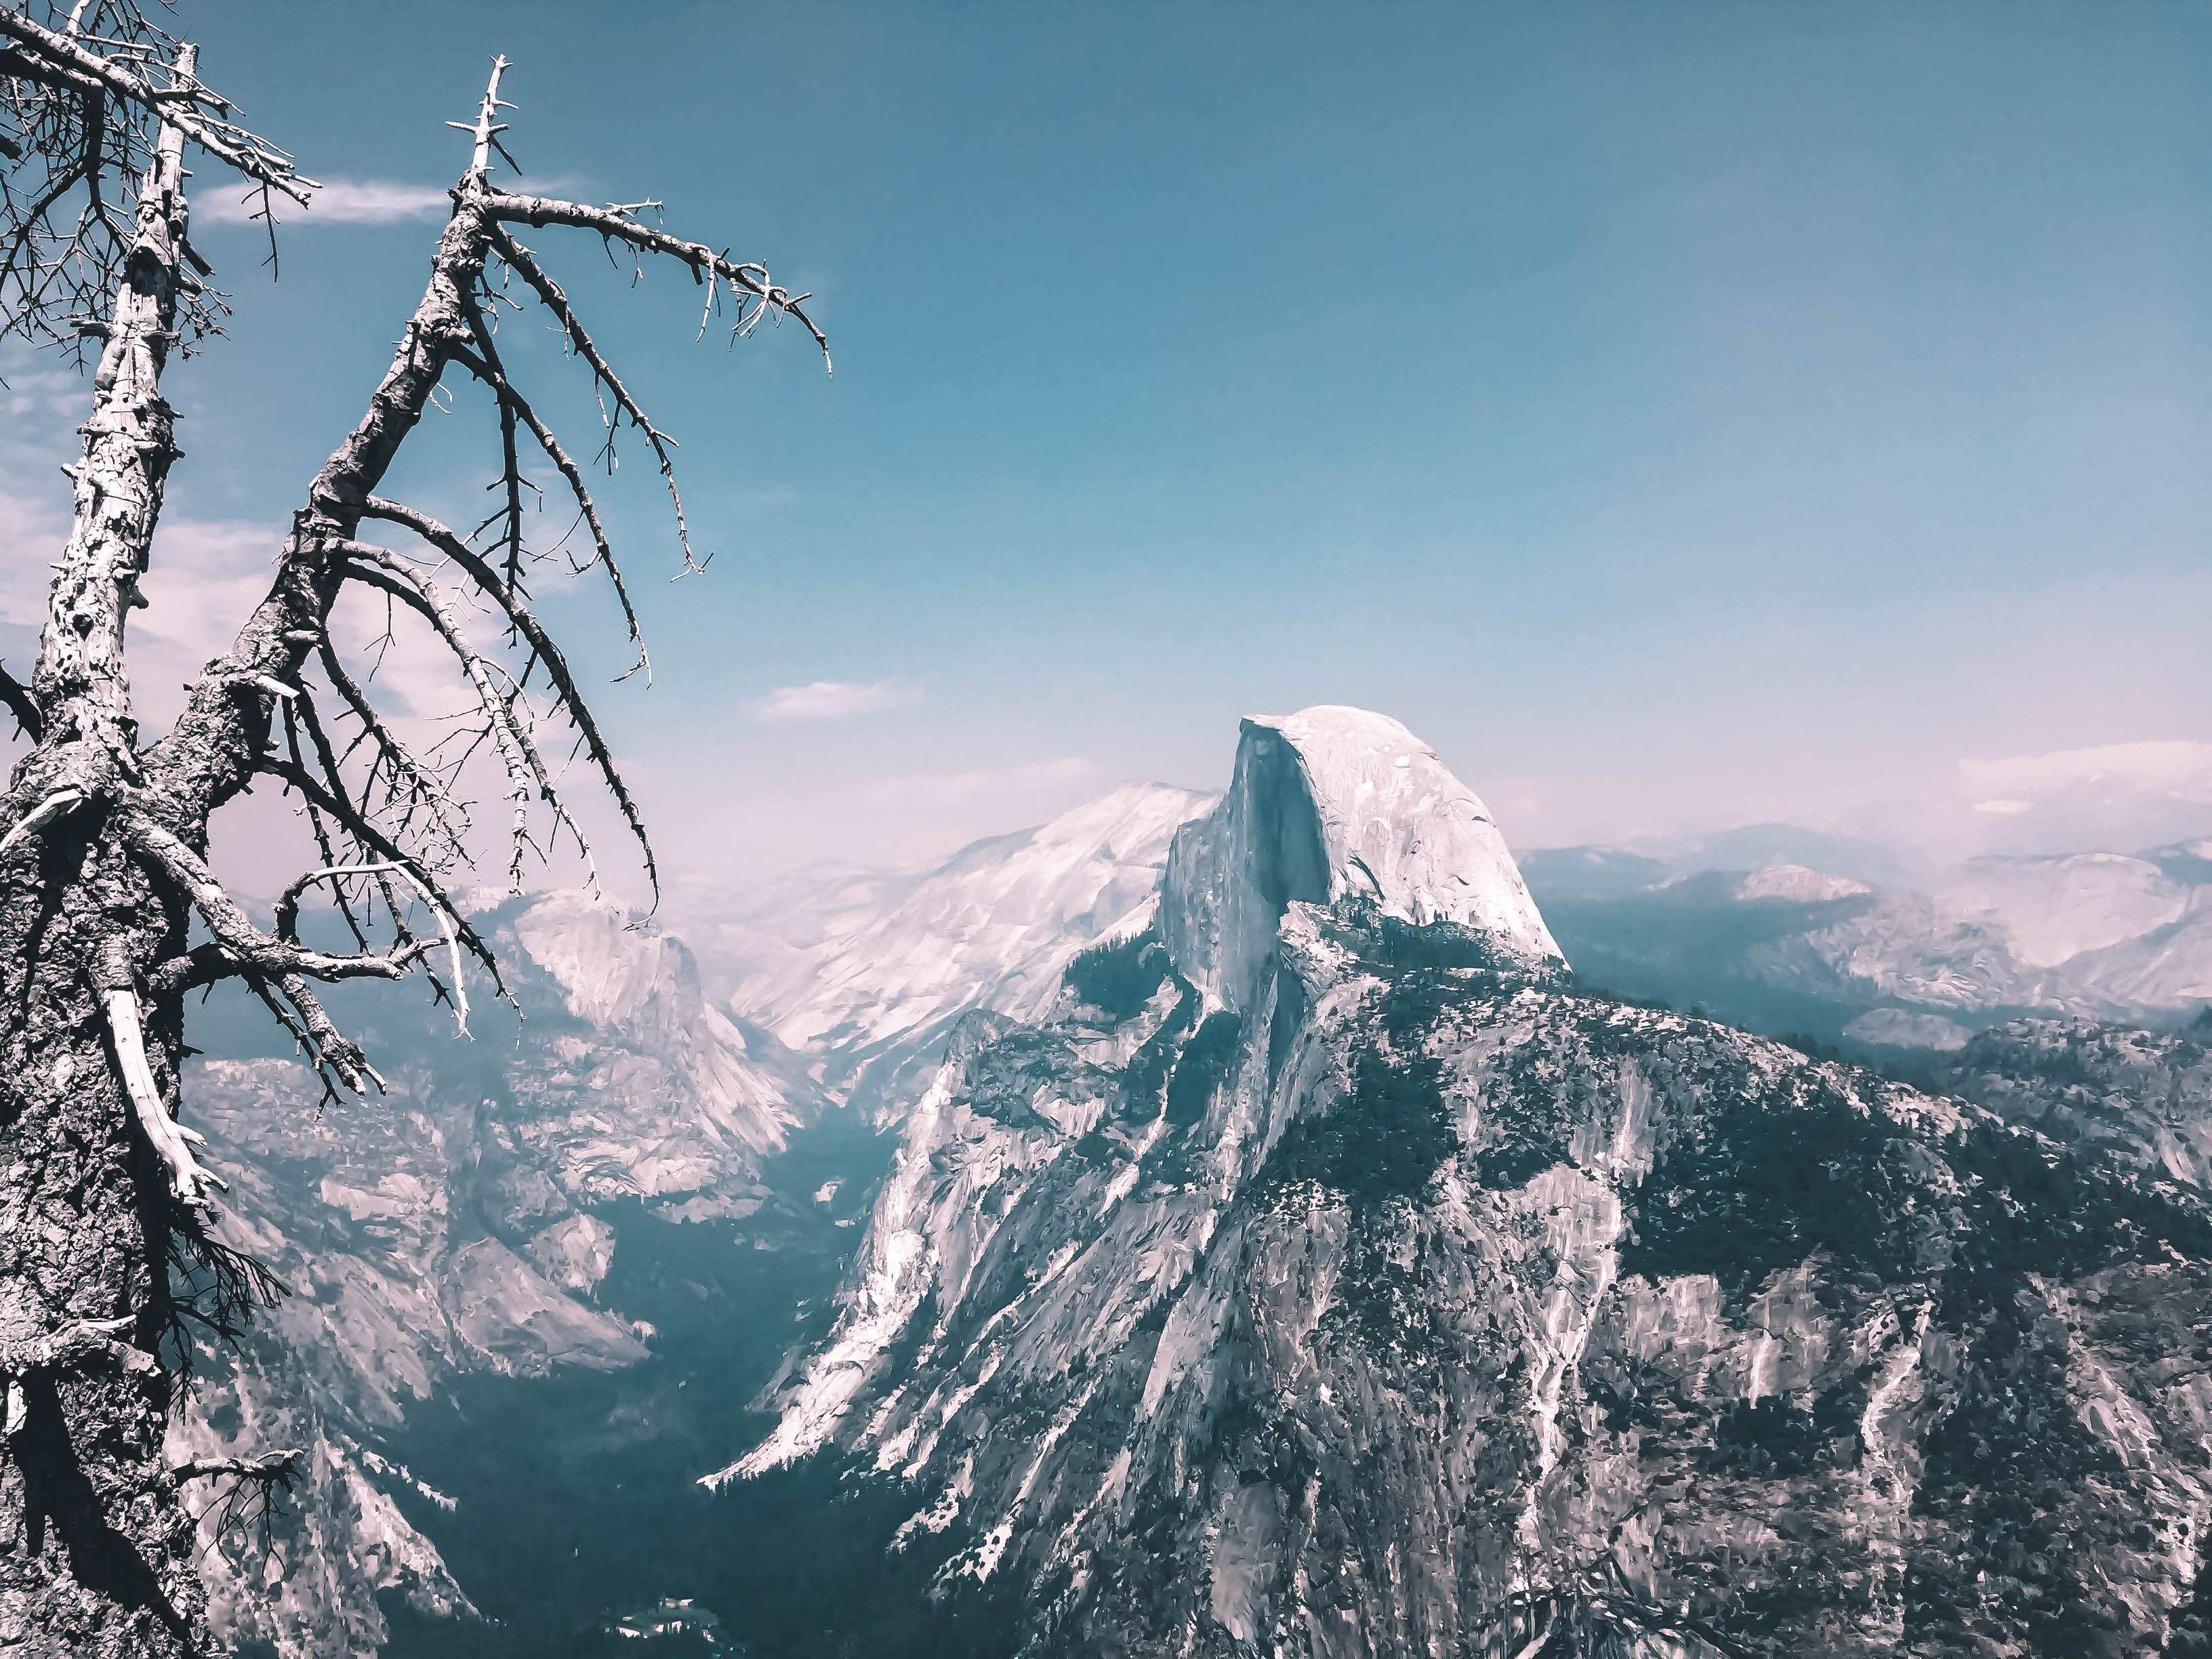 View of the snow capped mountains in Yosemite during winter. 